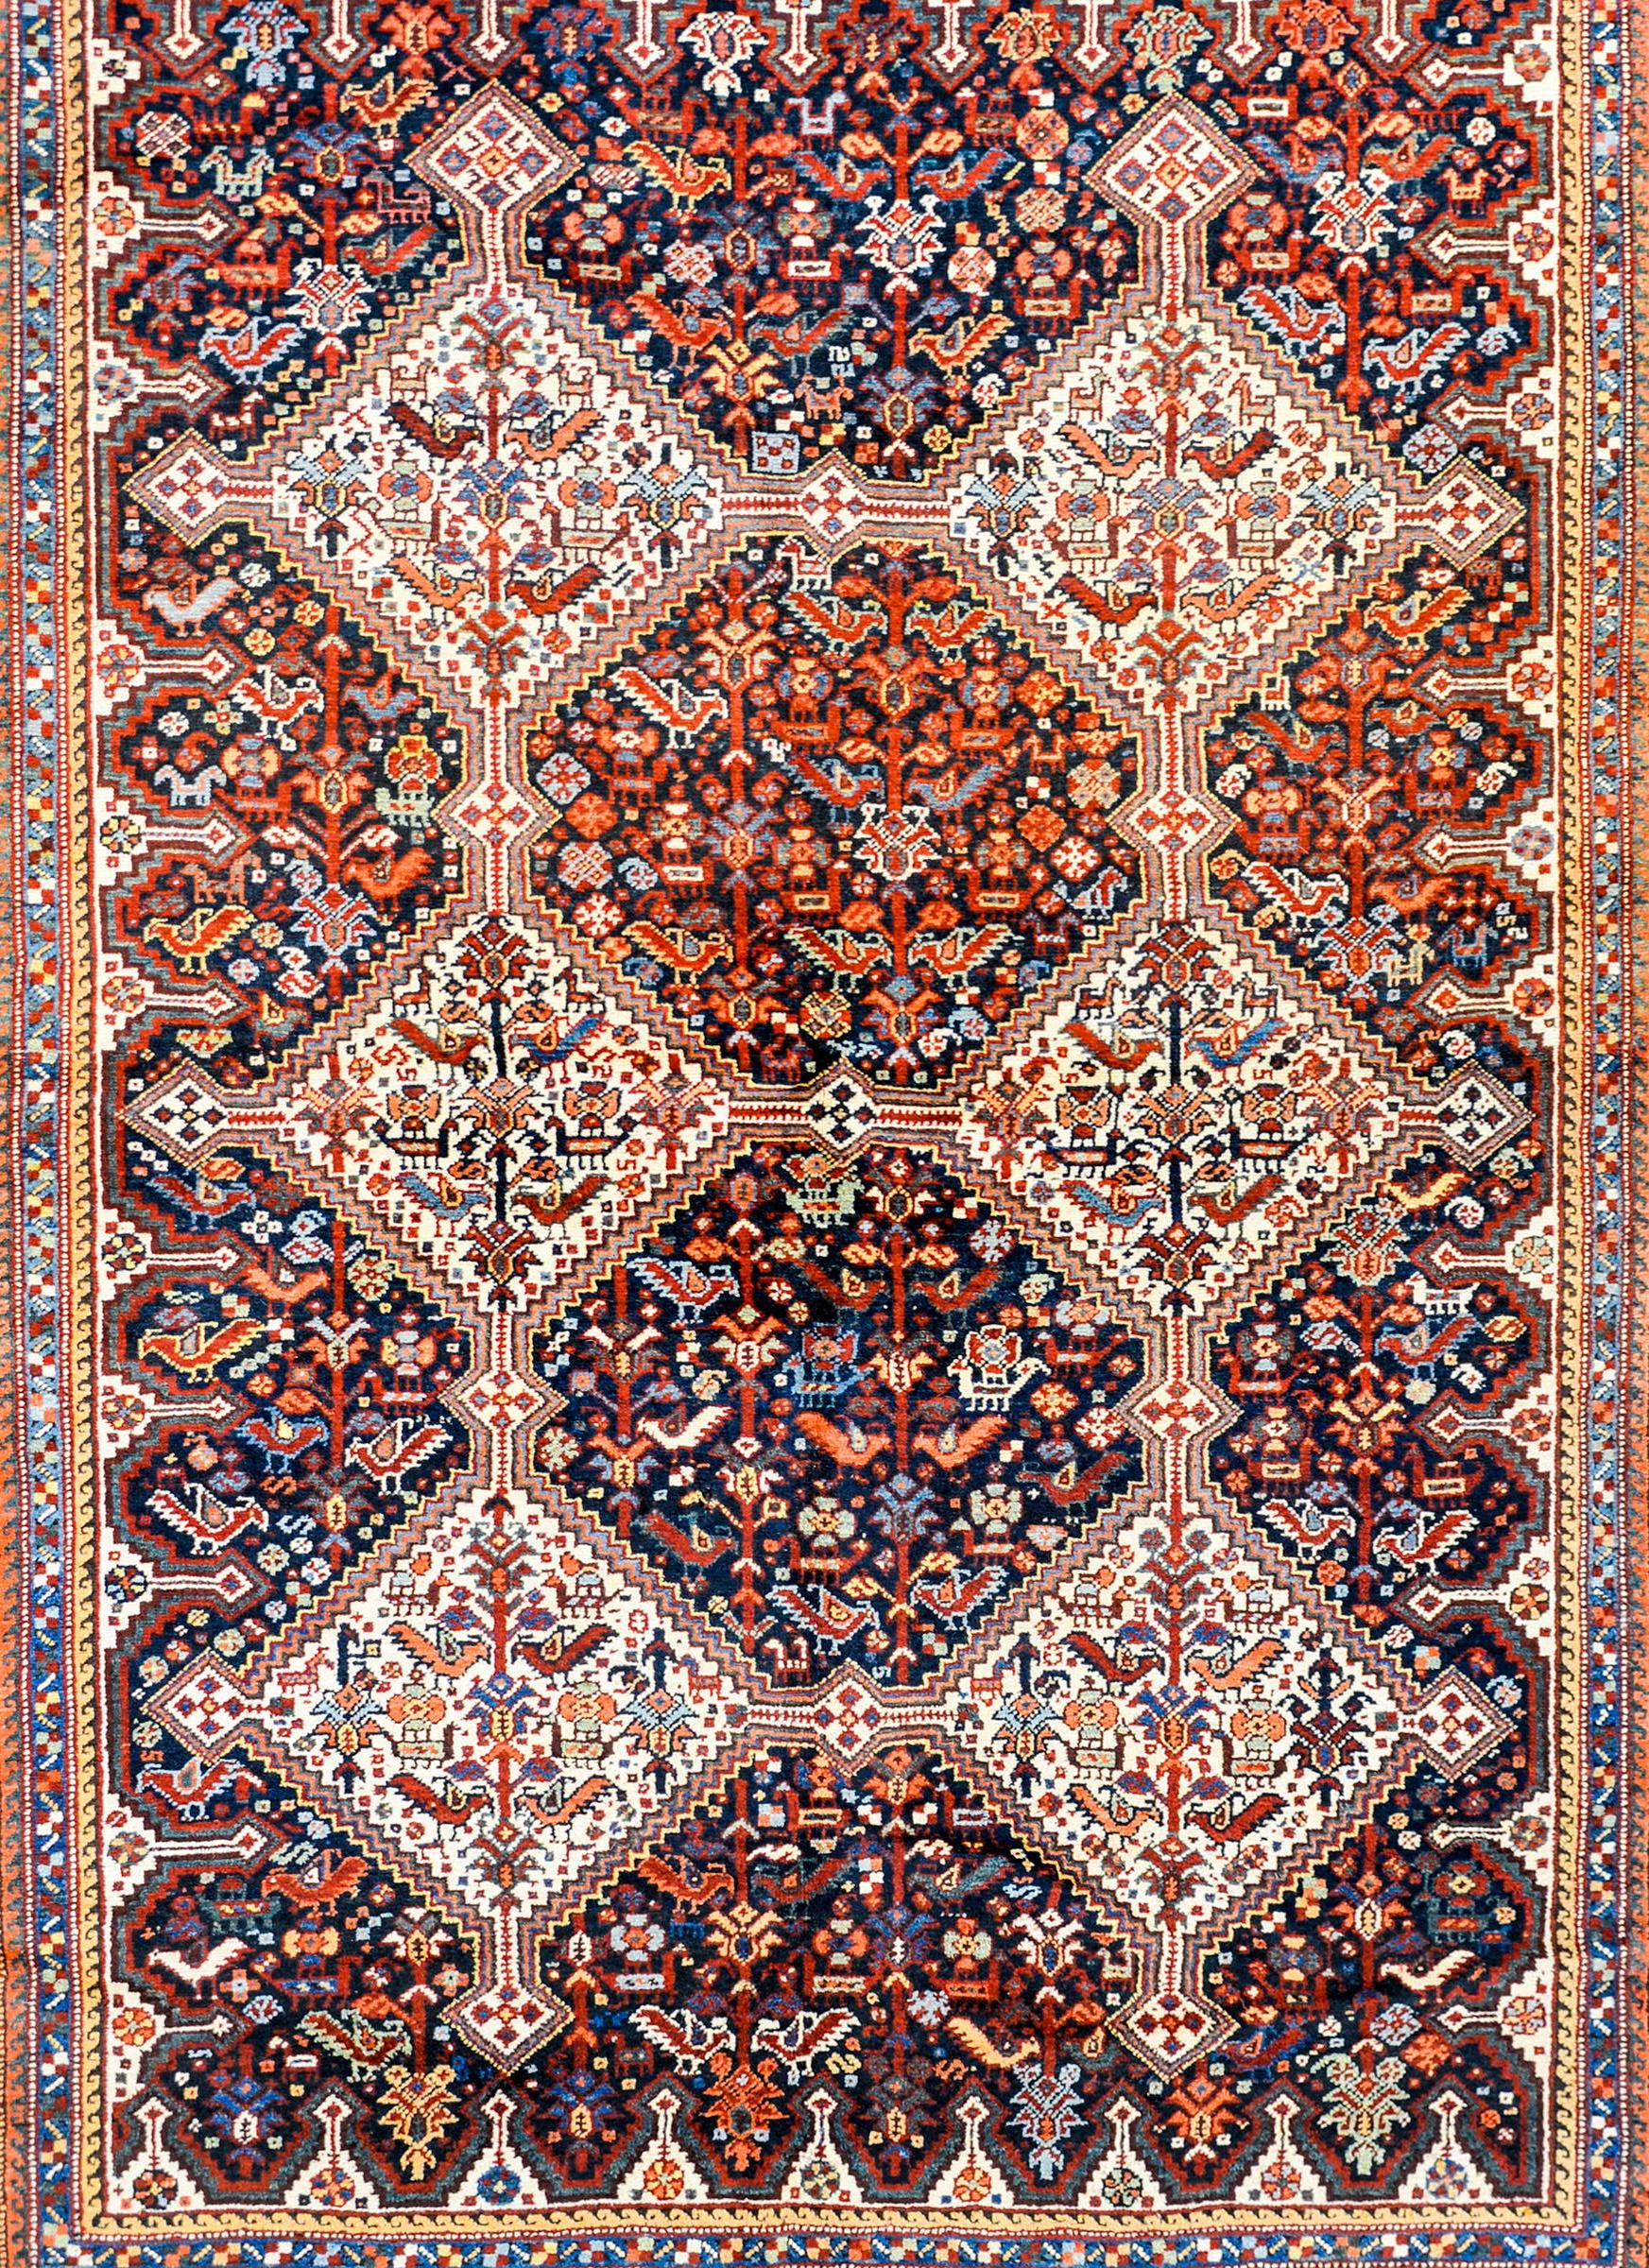 An outstanding early 20th century Persian Kamseh rug with six large white diamond medallions filled with densely woven stylized flowers and chickens on a black field of similarly styled flowers and chickens woven in myriad colors. The border is